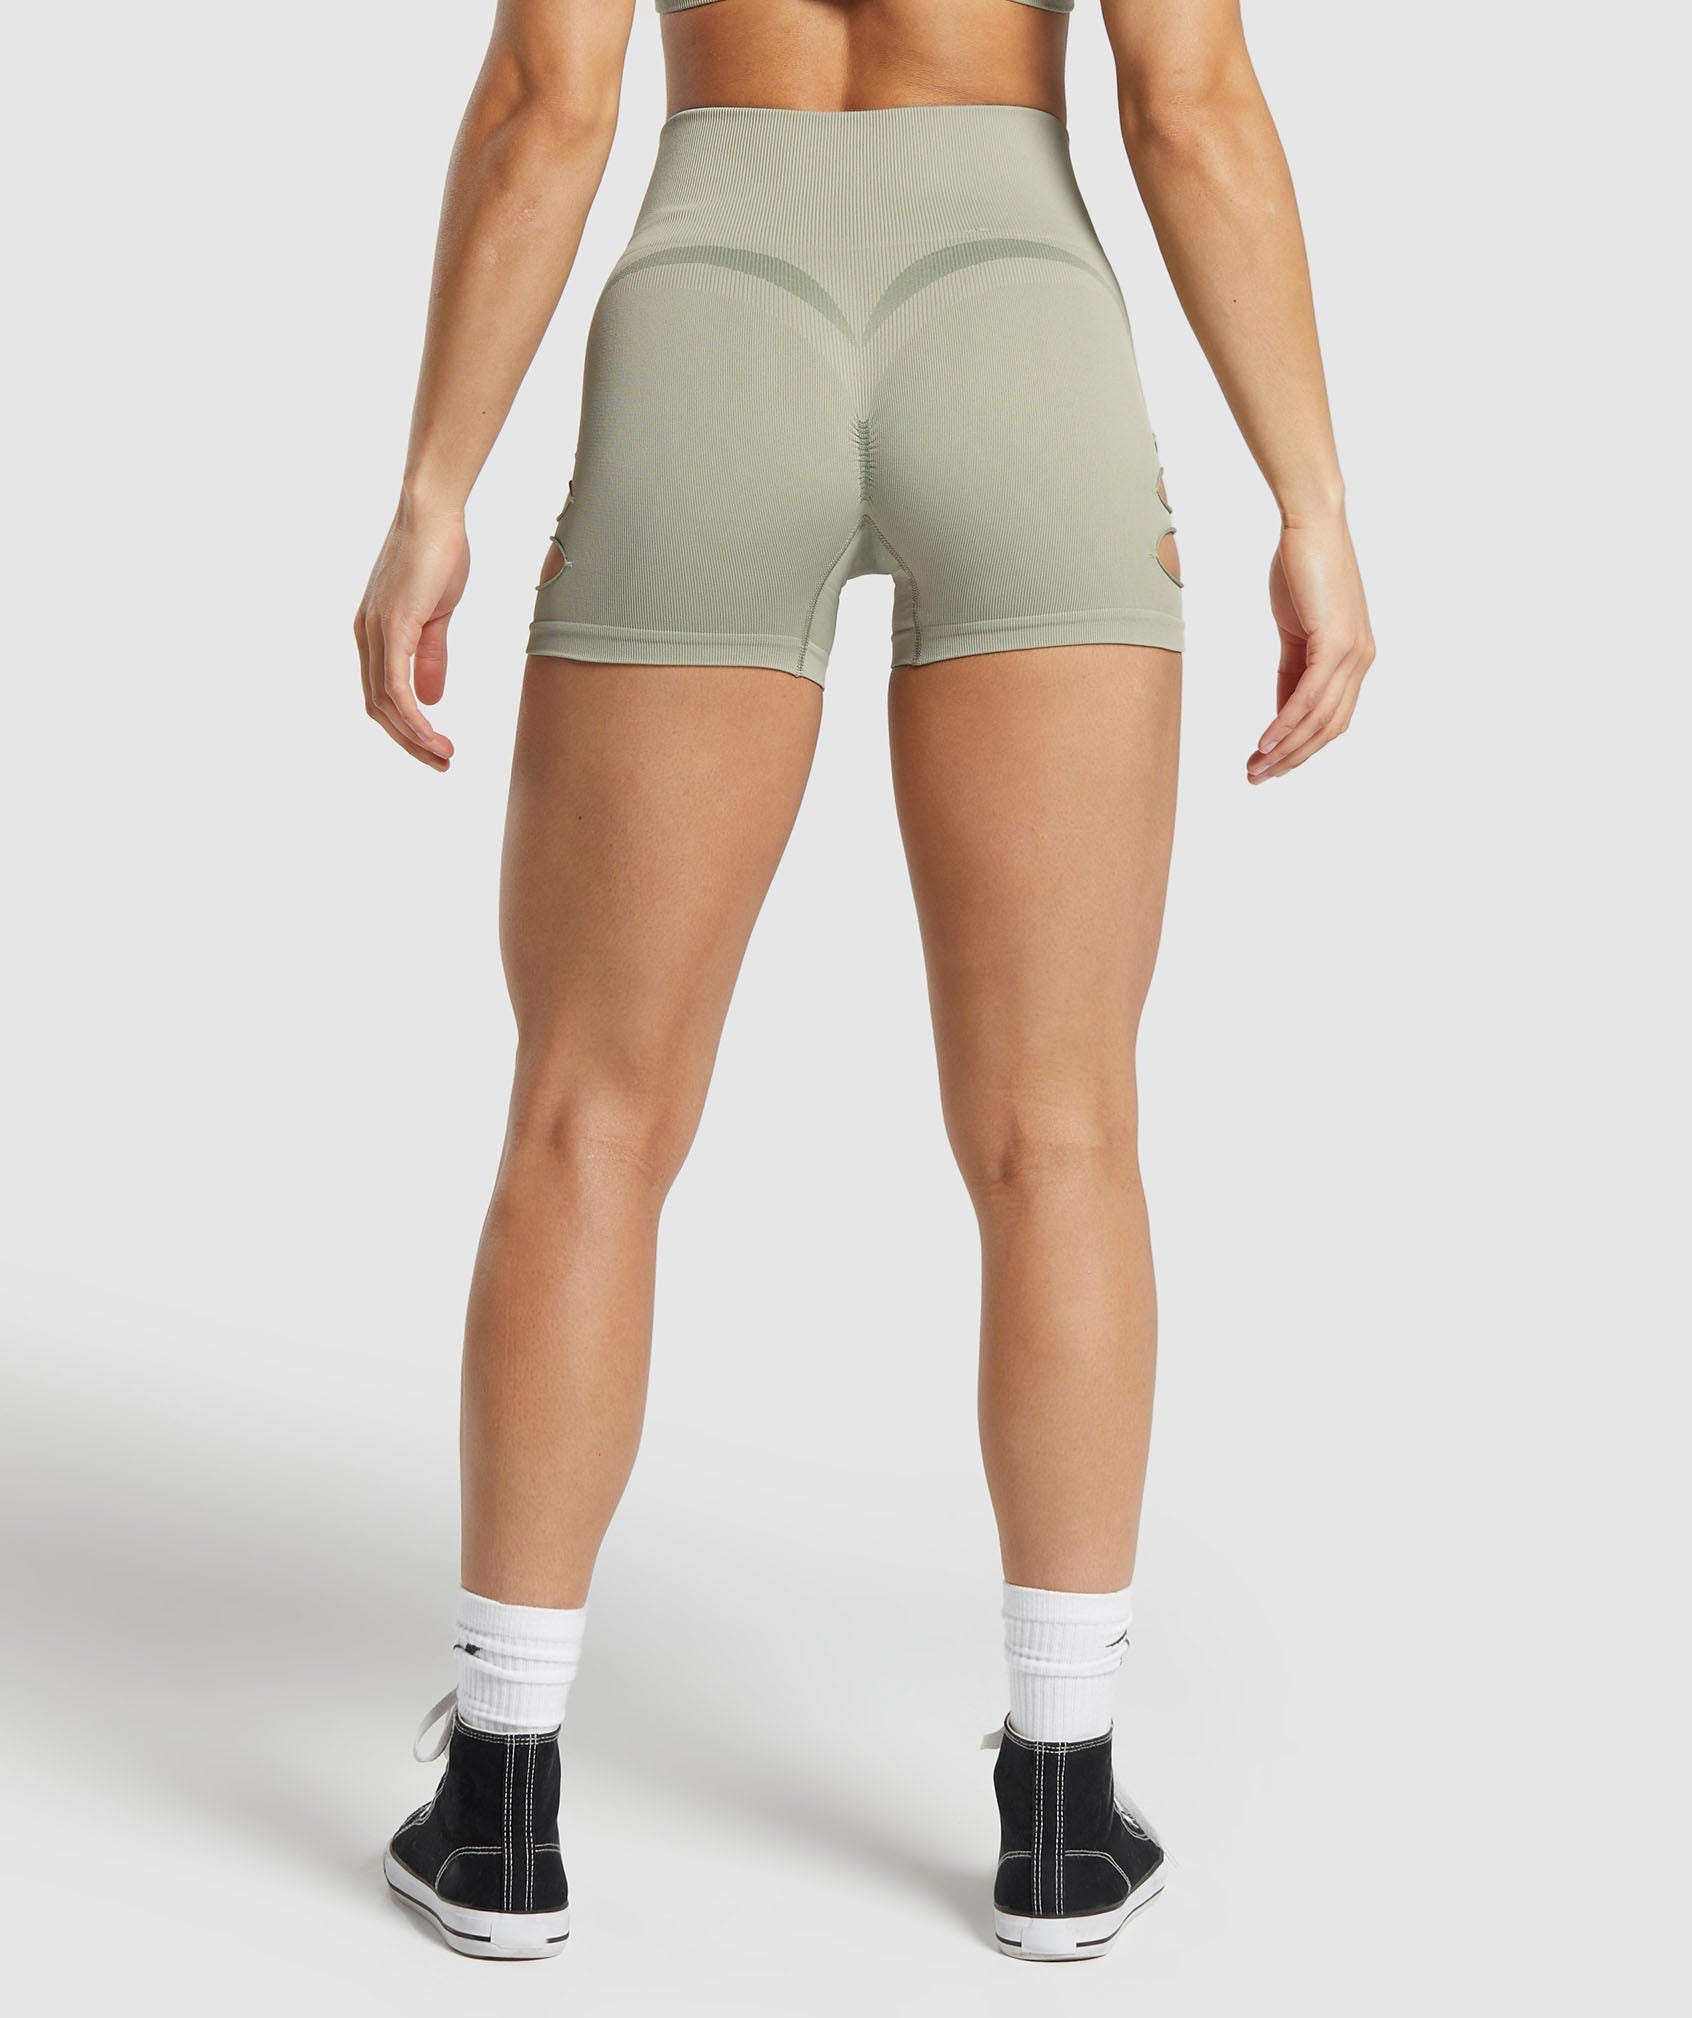 Gains Seamless Ripped Shorts in Chalk Green - view 3